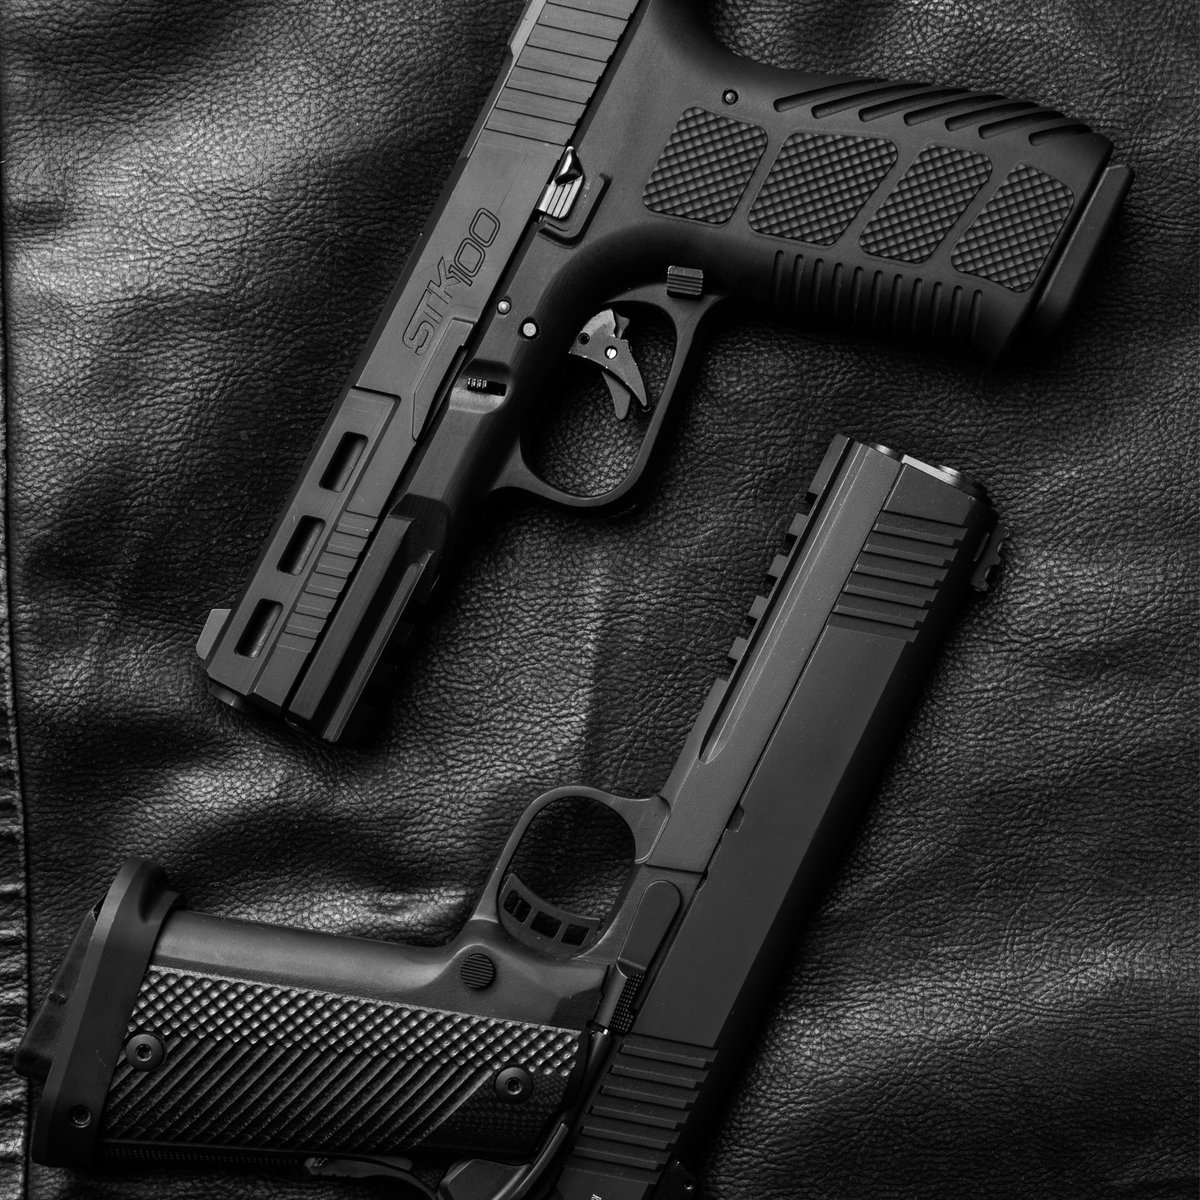 The STK100 or a RIA 1911: What’s your weapon of choice?